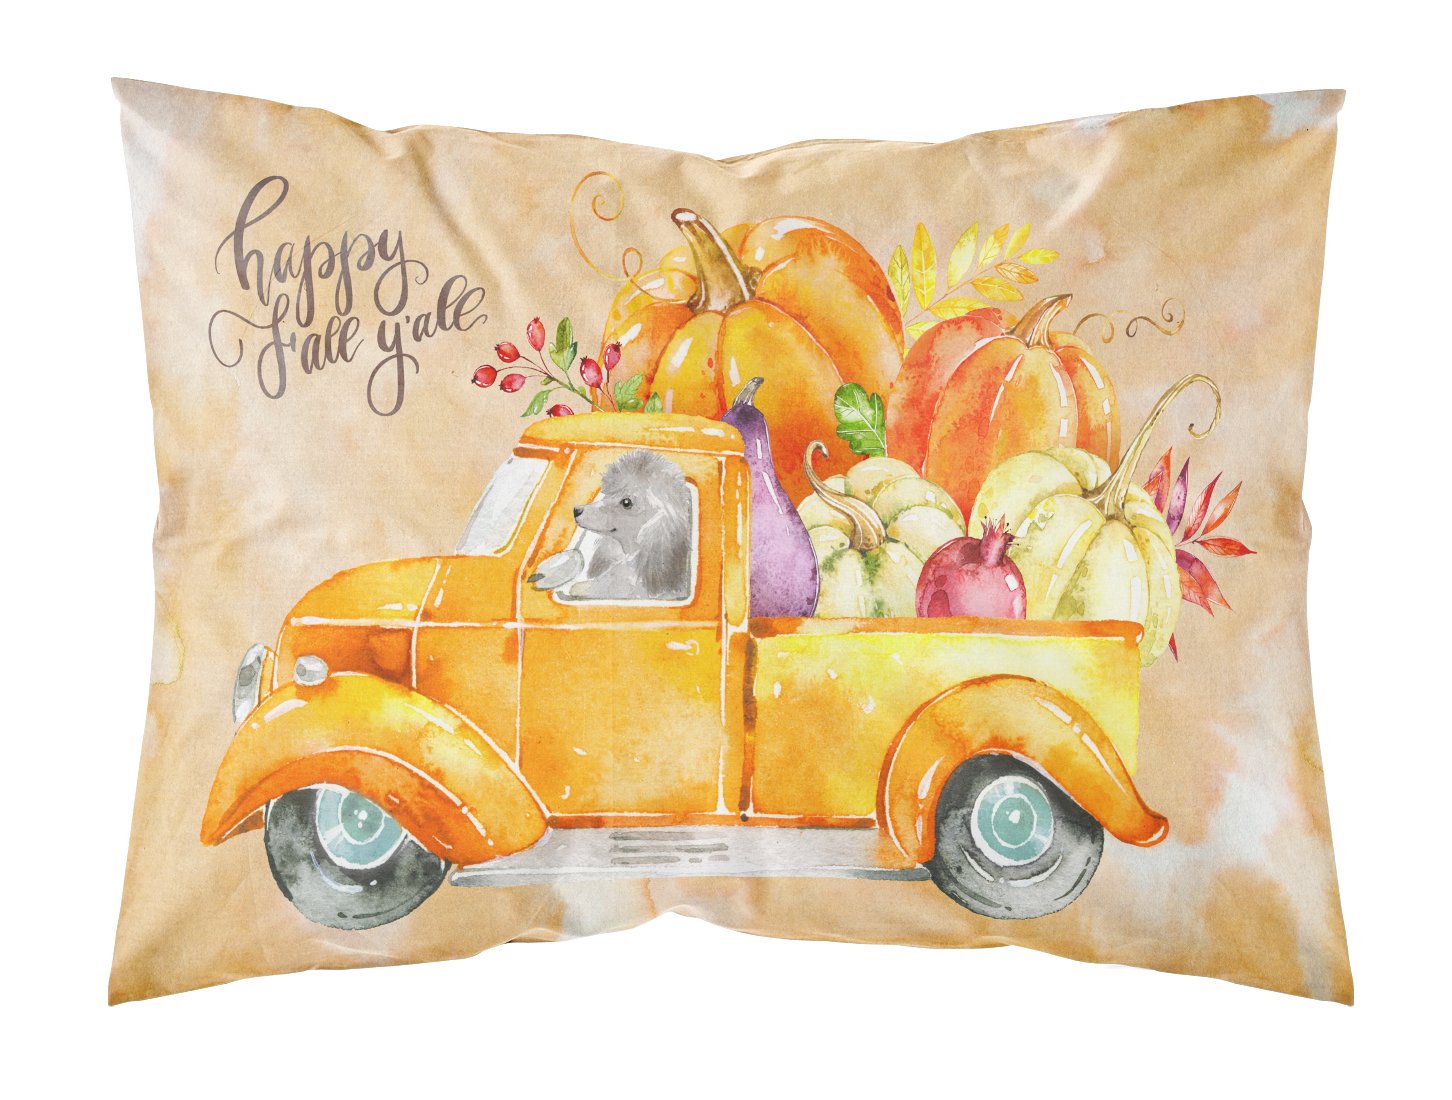 Fall Harvest Silver Poodle Fabric Standard Pillowcase CK2669PILLOWCASE by Caroline's Treasures